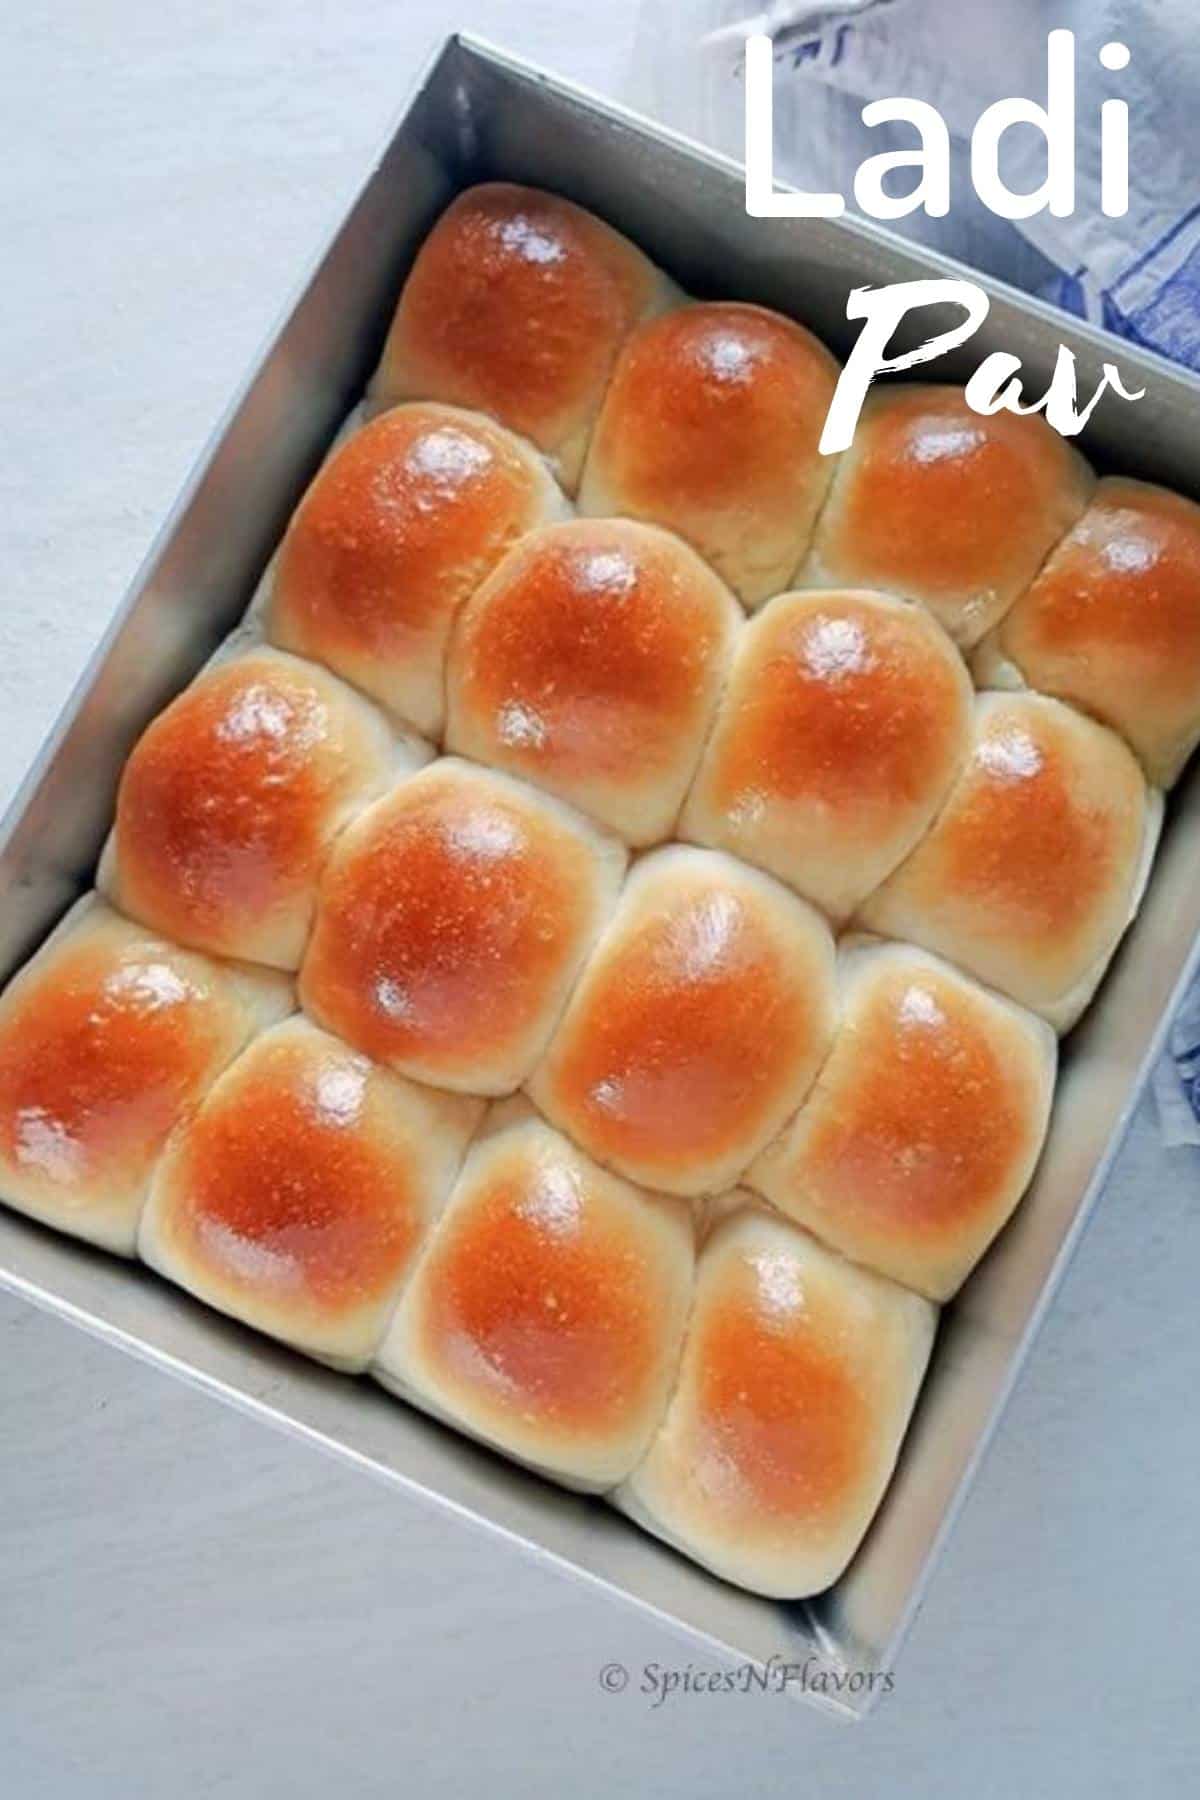 baked pavs placed in the baking tray